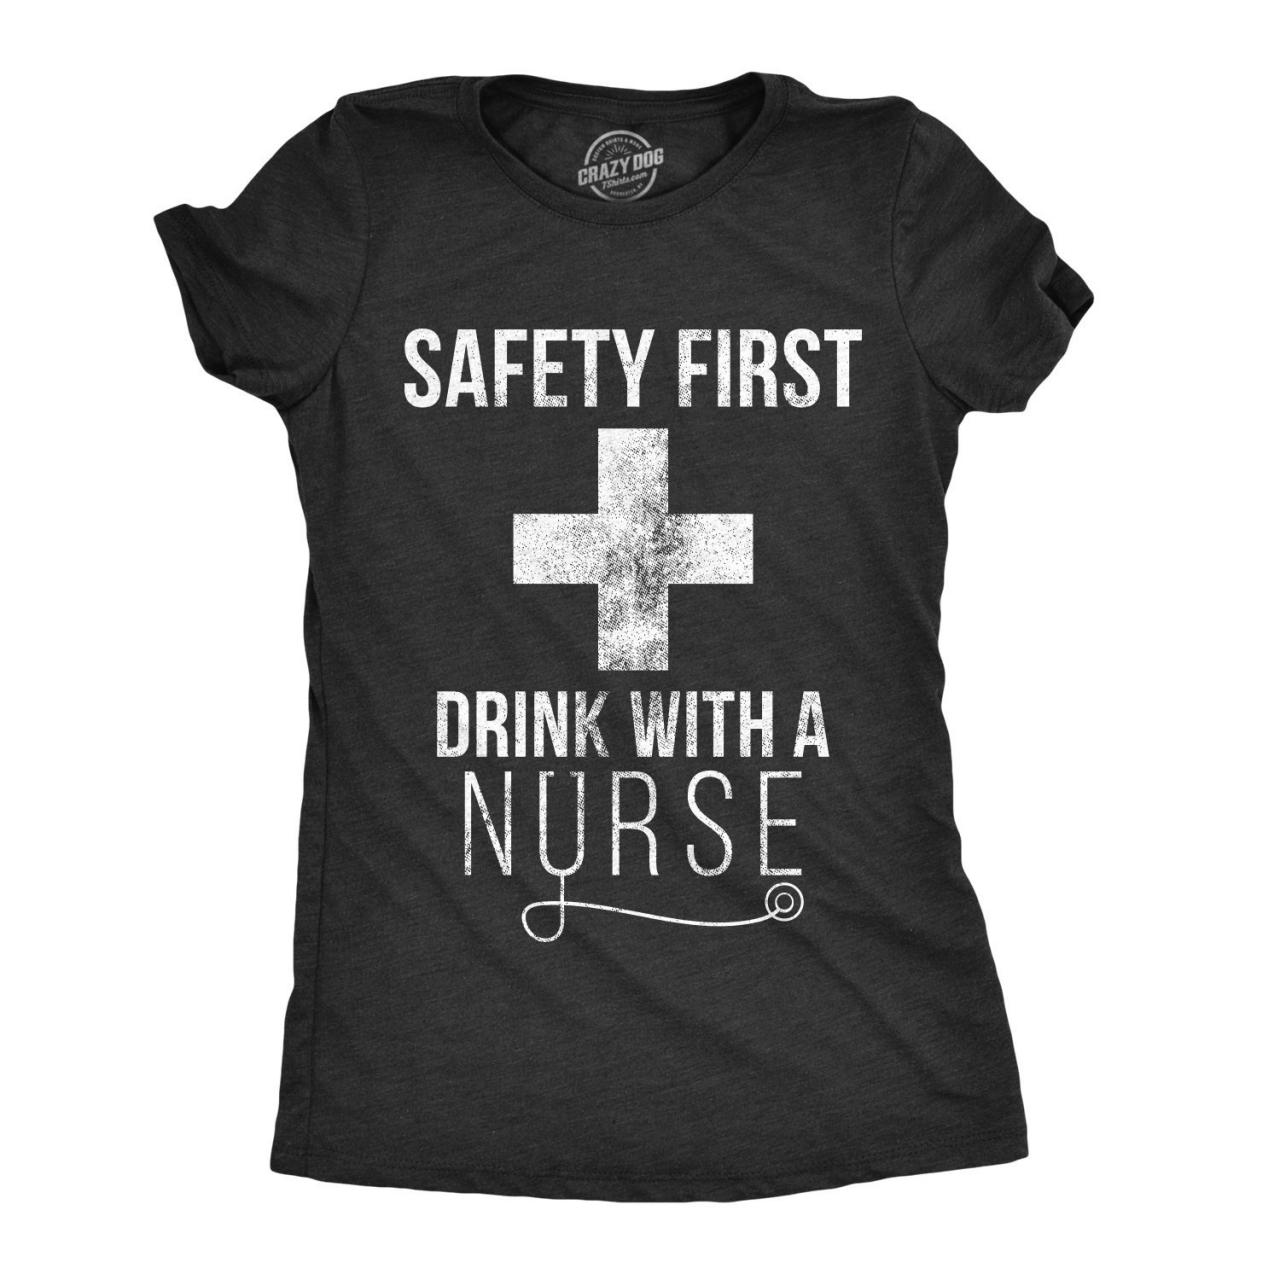 Safety First Drink With A Nurse Shirt, Funny Nurse Tee, Gift For Nurse, Medical Profession Gifts, Nursing Gifts, Shirts With Sayings Women